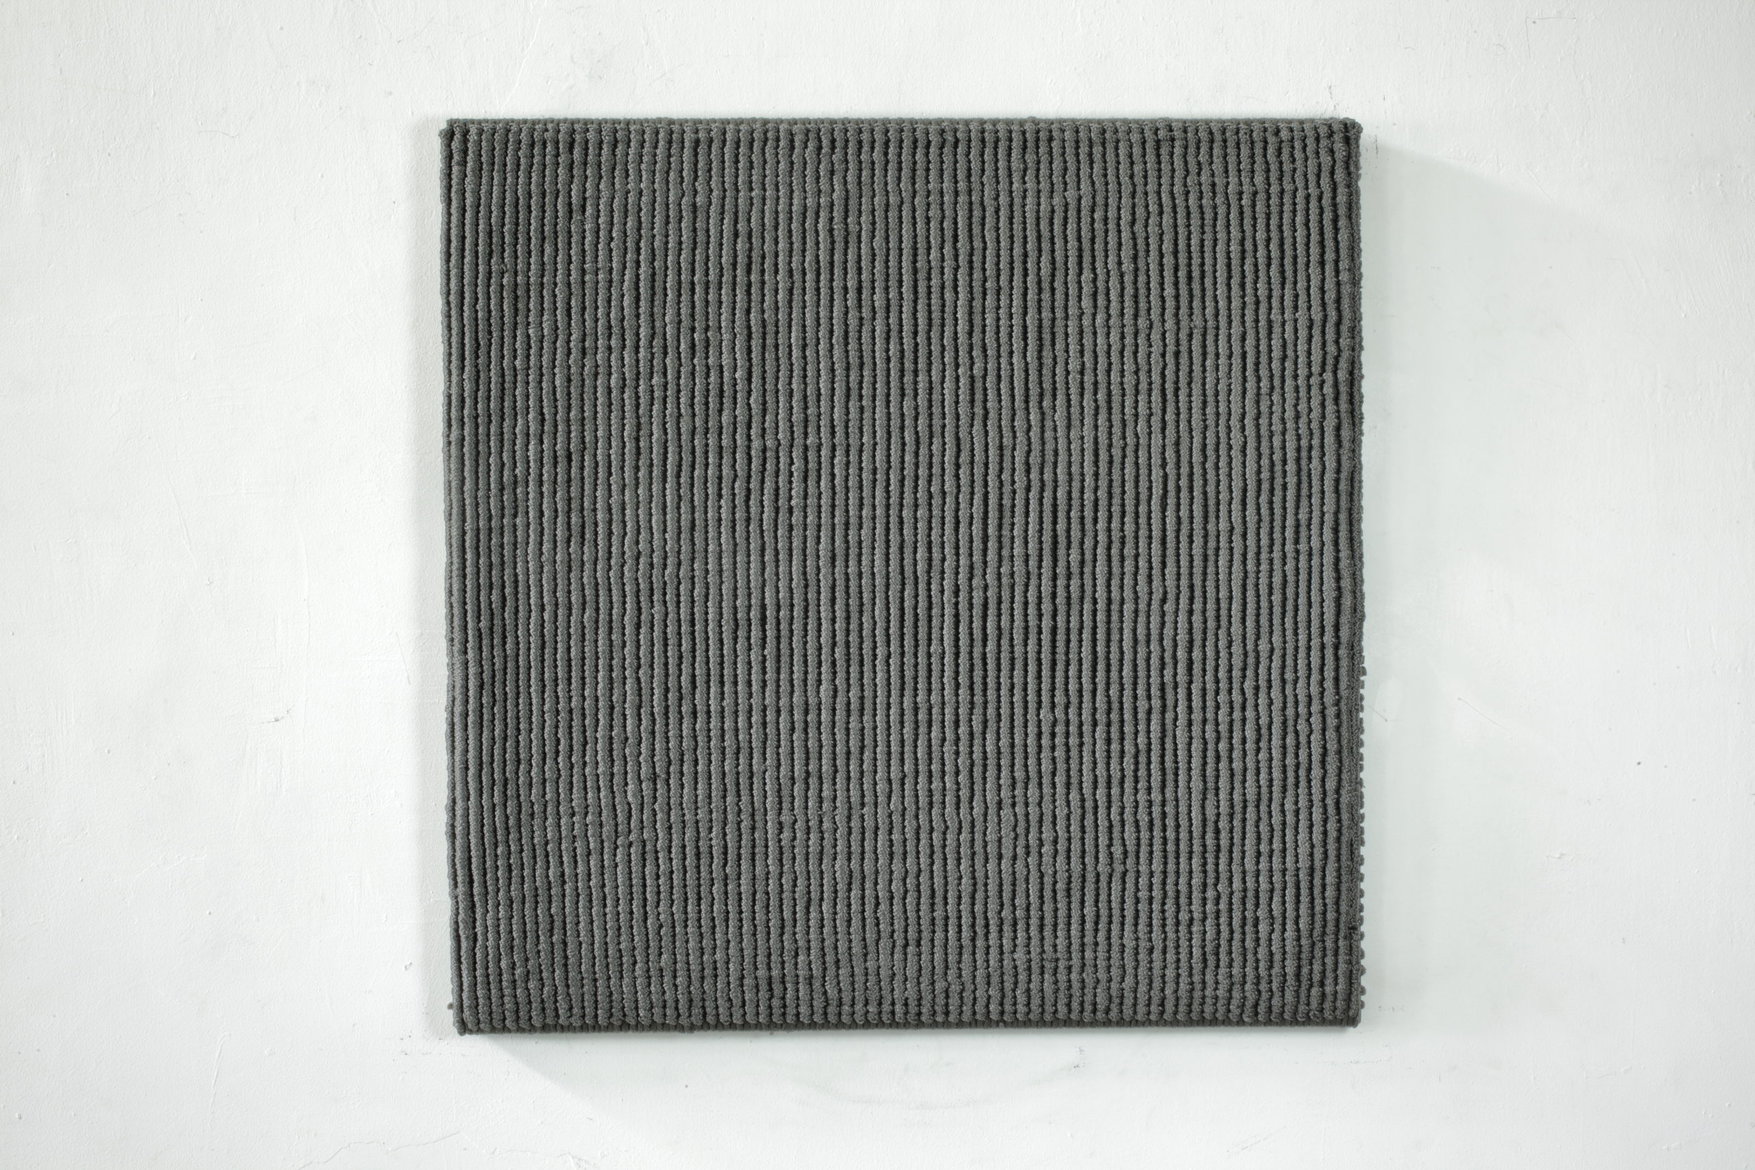 'Between Grey', 2022, polyester and polypropylene rope on polished aluminium frame, 110 x 110 x 8cm